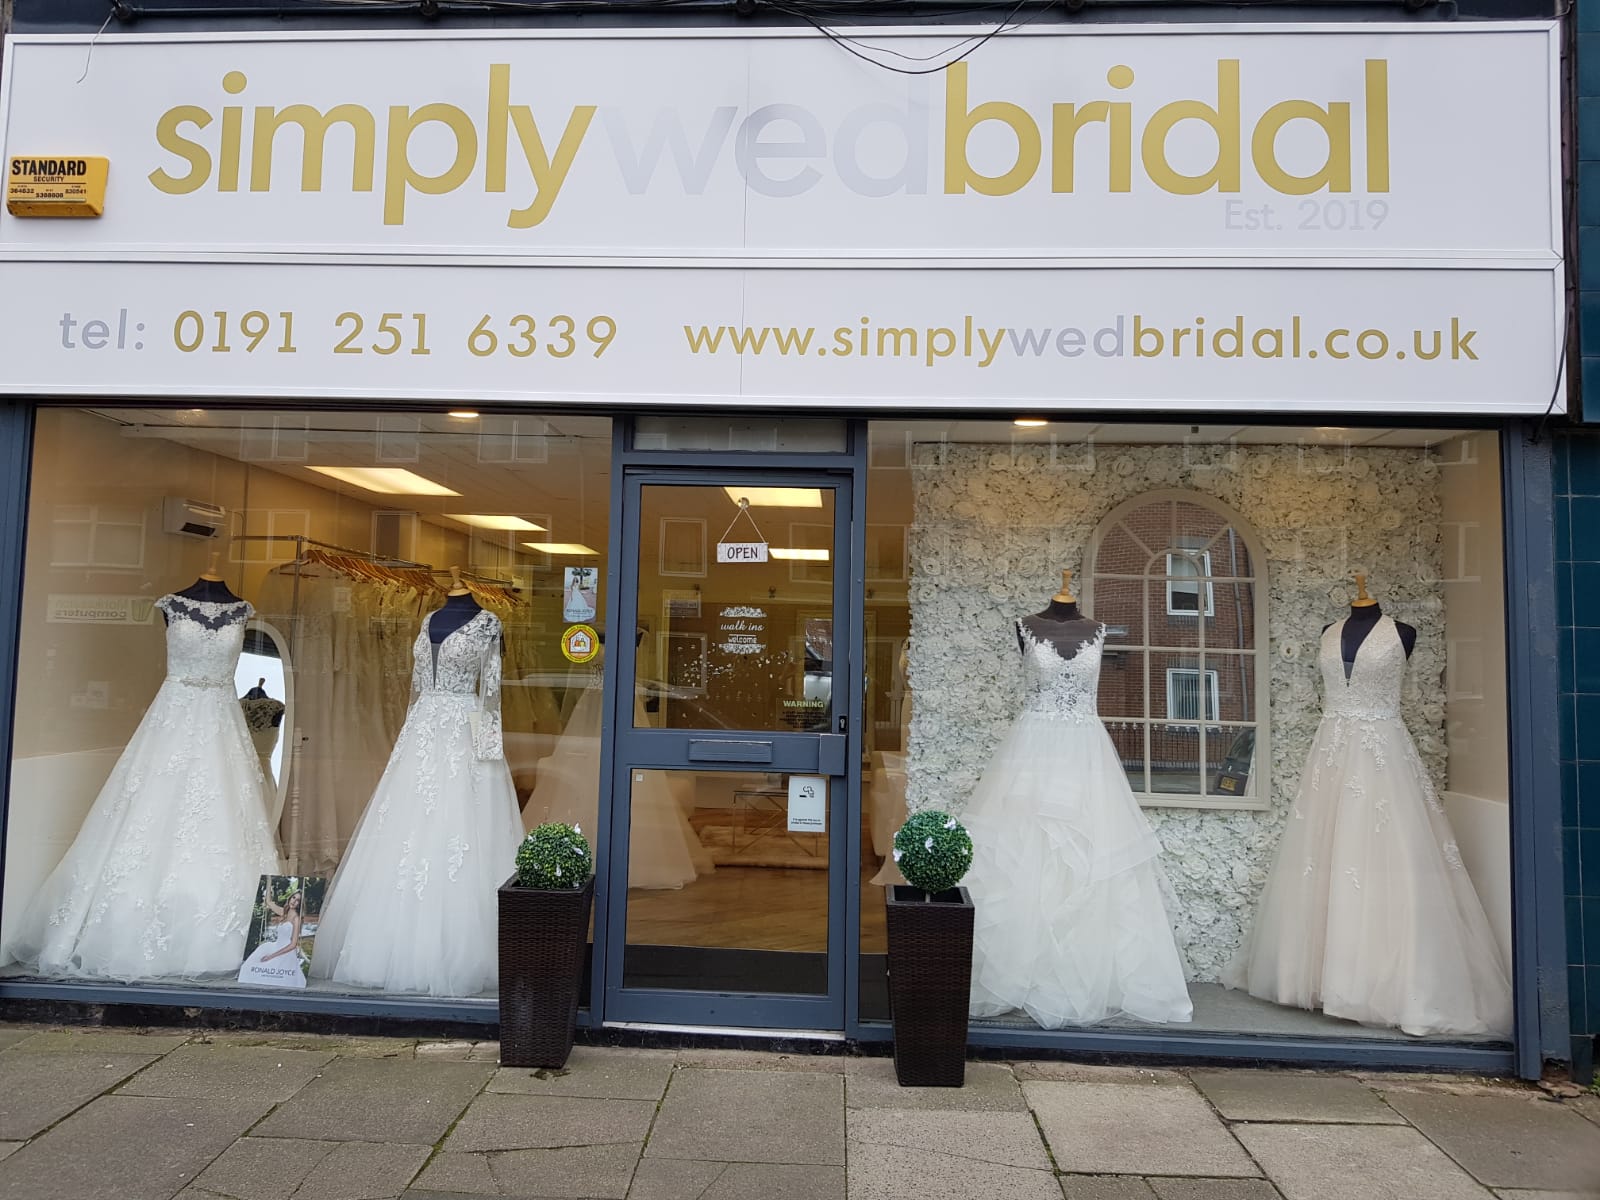 Newcastle's Simply Wed Bridal shop sign and window display showcasing four ivory wedding dresses on black mannequins. 